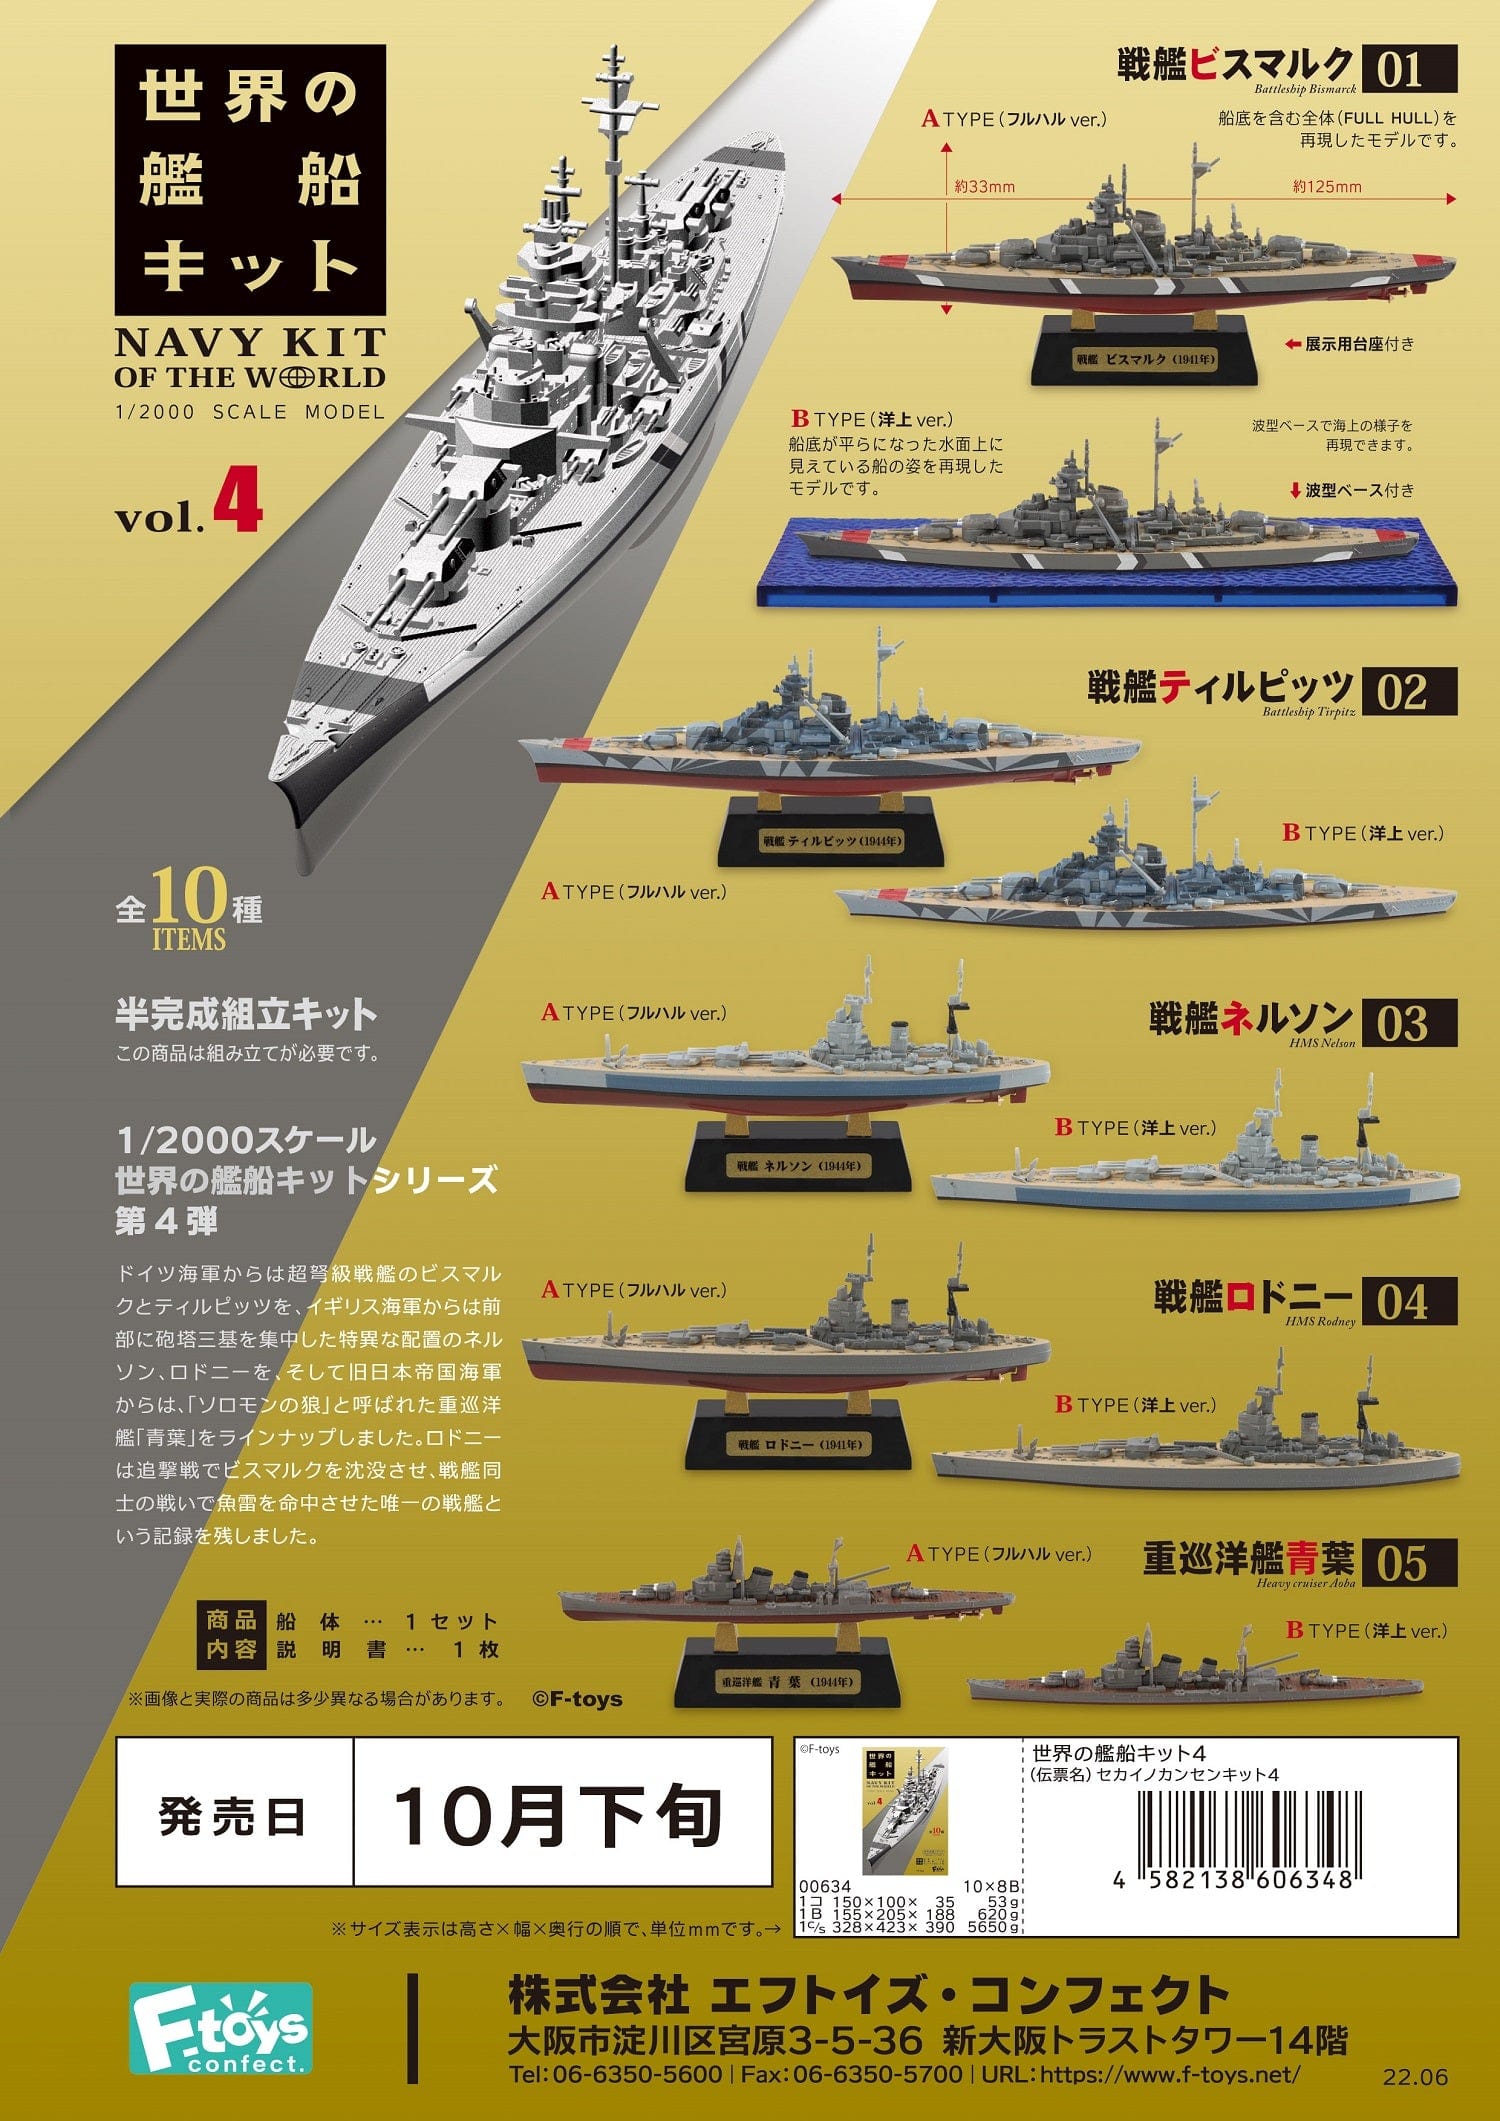 F-toys confect NAVY KIT OF THE WORLD 4